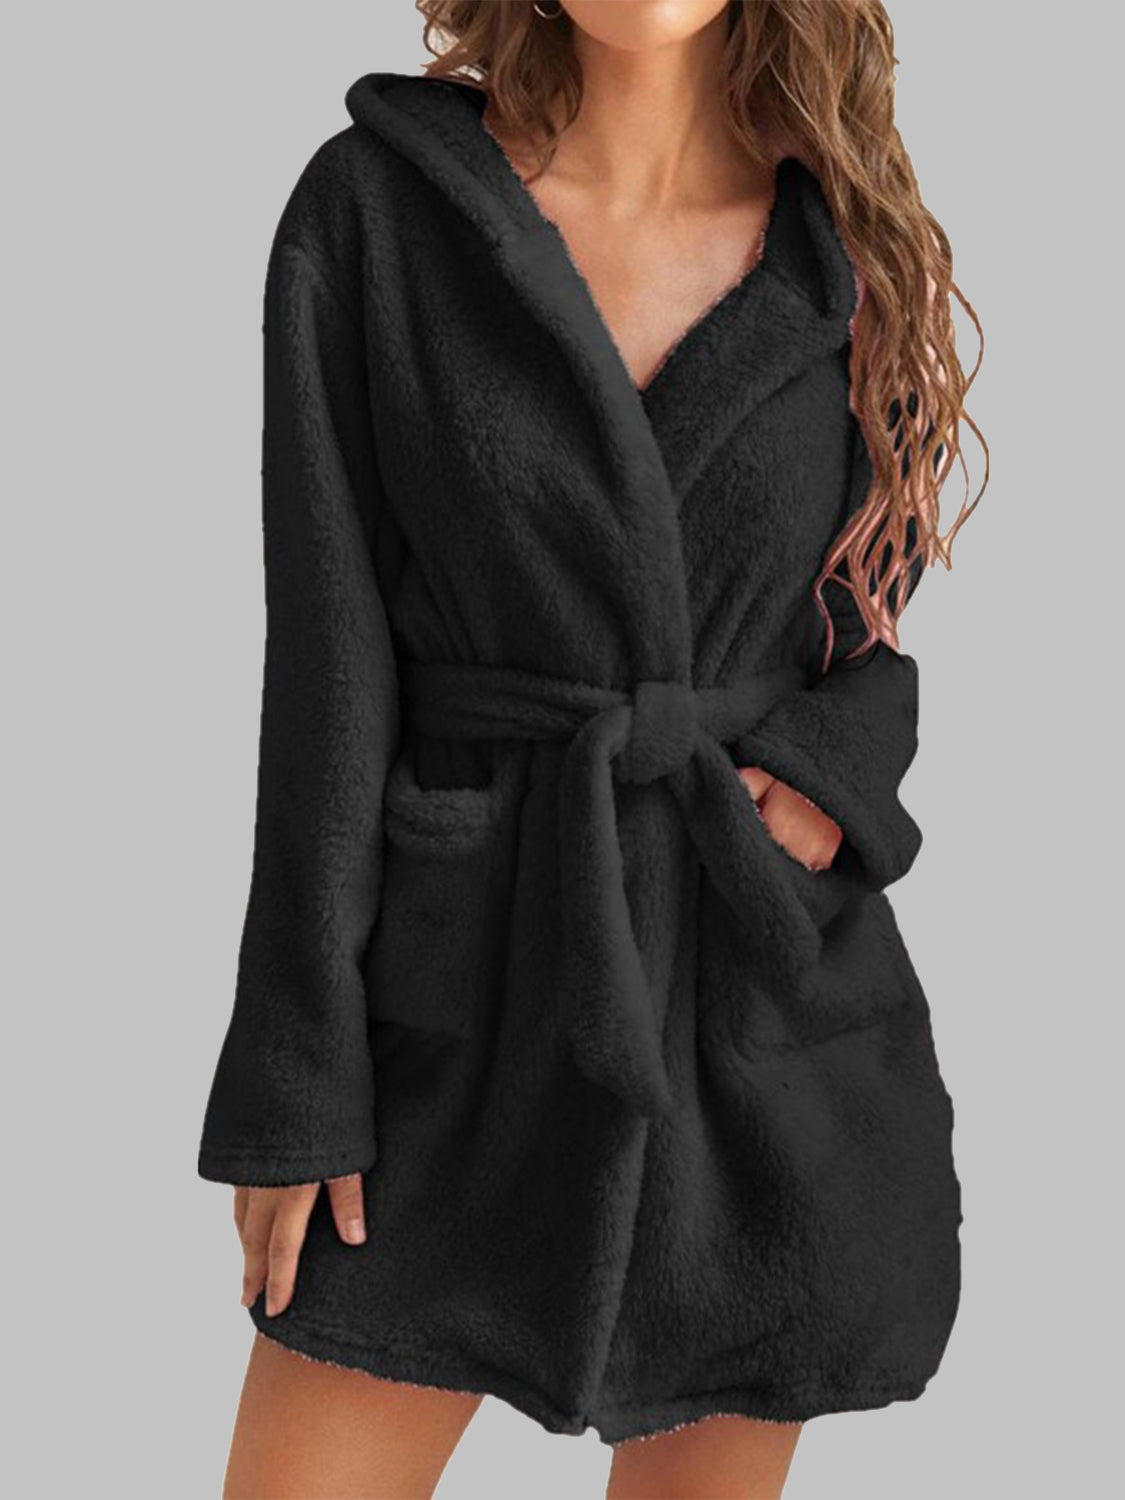 Tie Waist Hooded Robe - Tophatter Deals and Online Shopping - Electronics, Jewelry, Beauty, Health, Gadgets, Fashion - Tophatter's Discounts & Offers - tophatters - tophatters.co